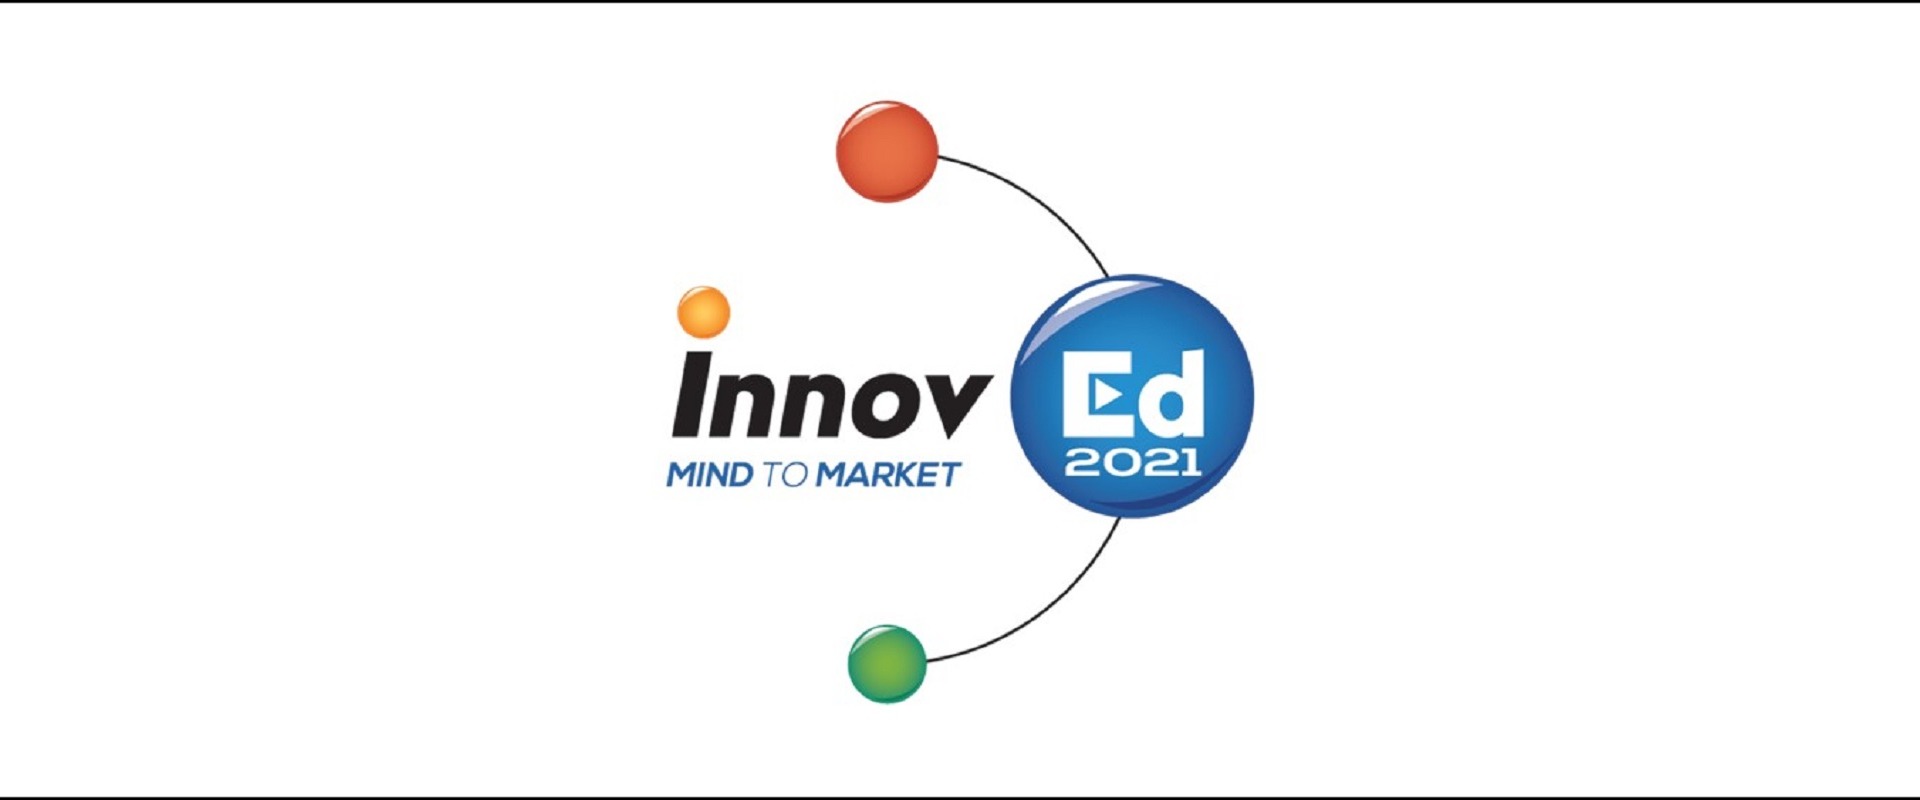 Congratulations to the winners and runner ups of InnovEd 2021!